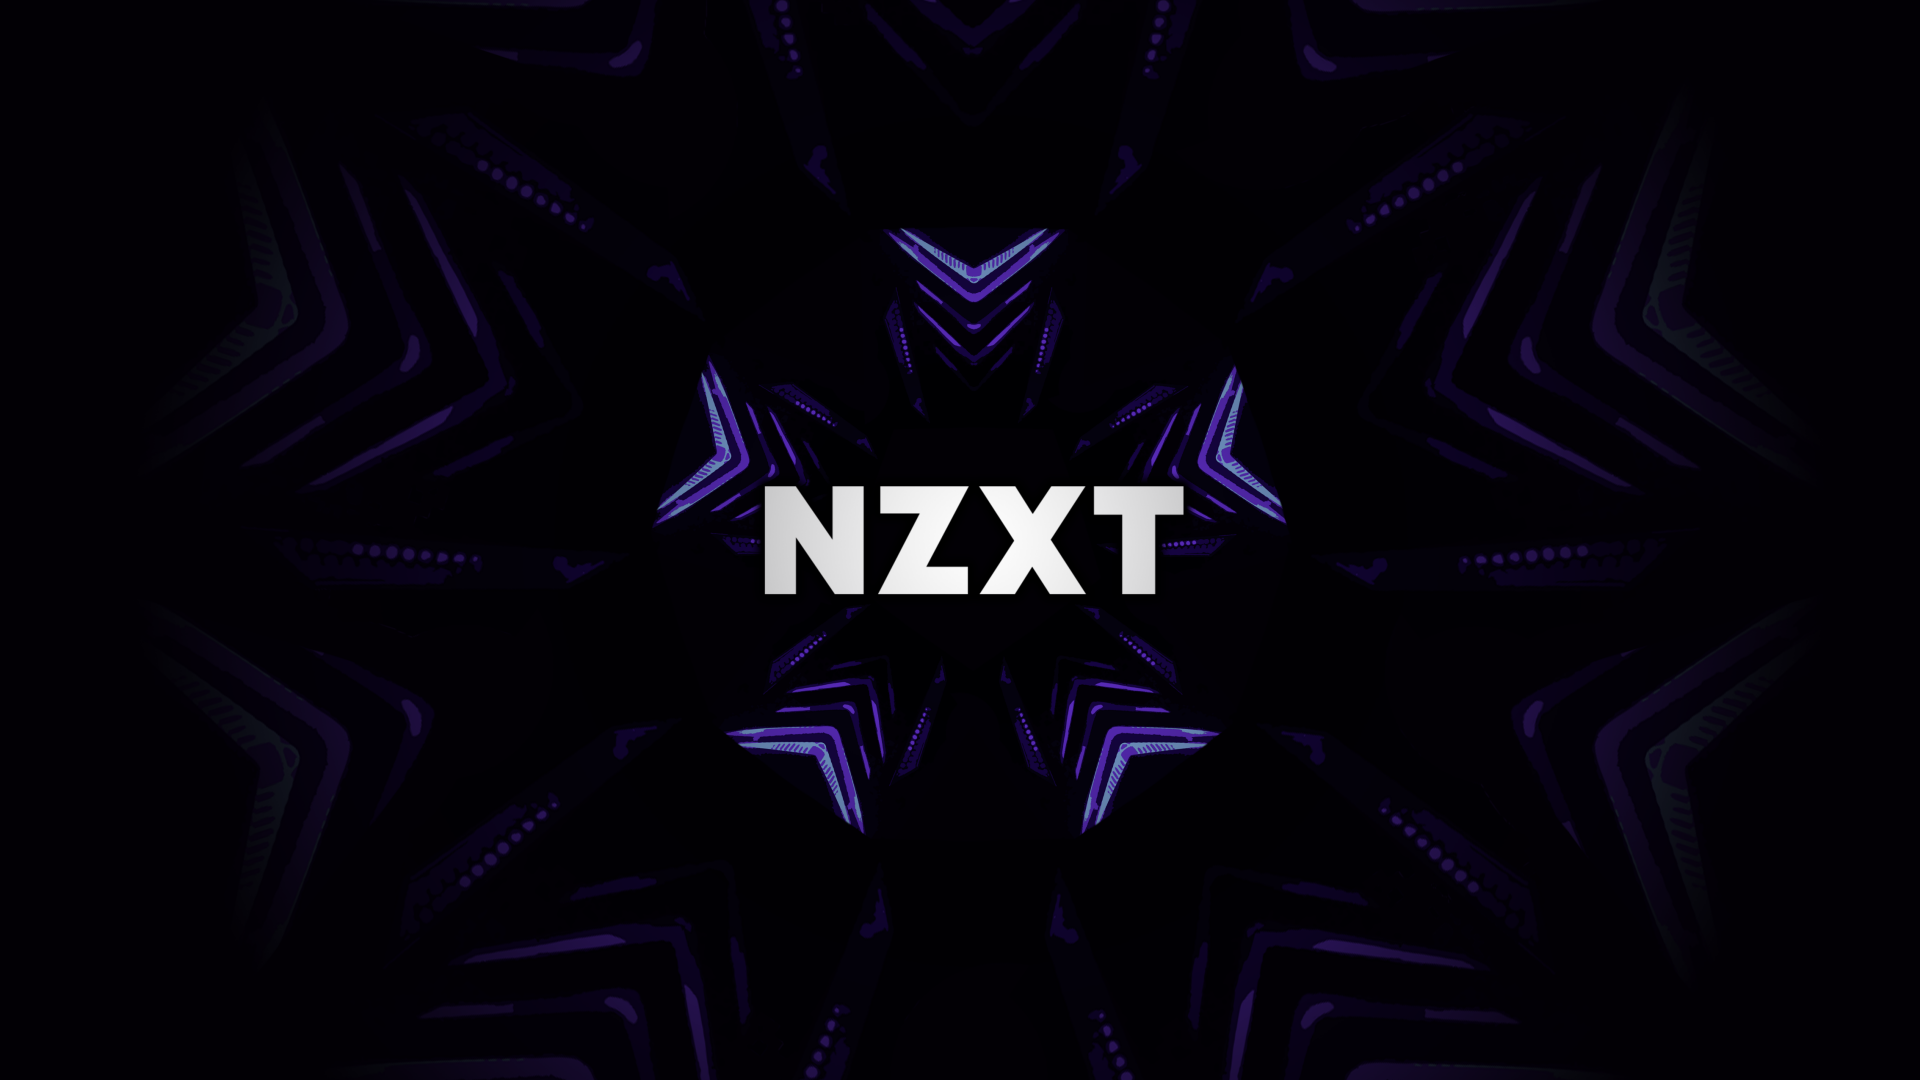 4535x2551 NZXT Wallpaper Background Image. 